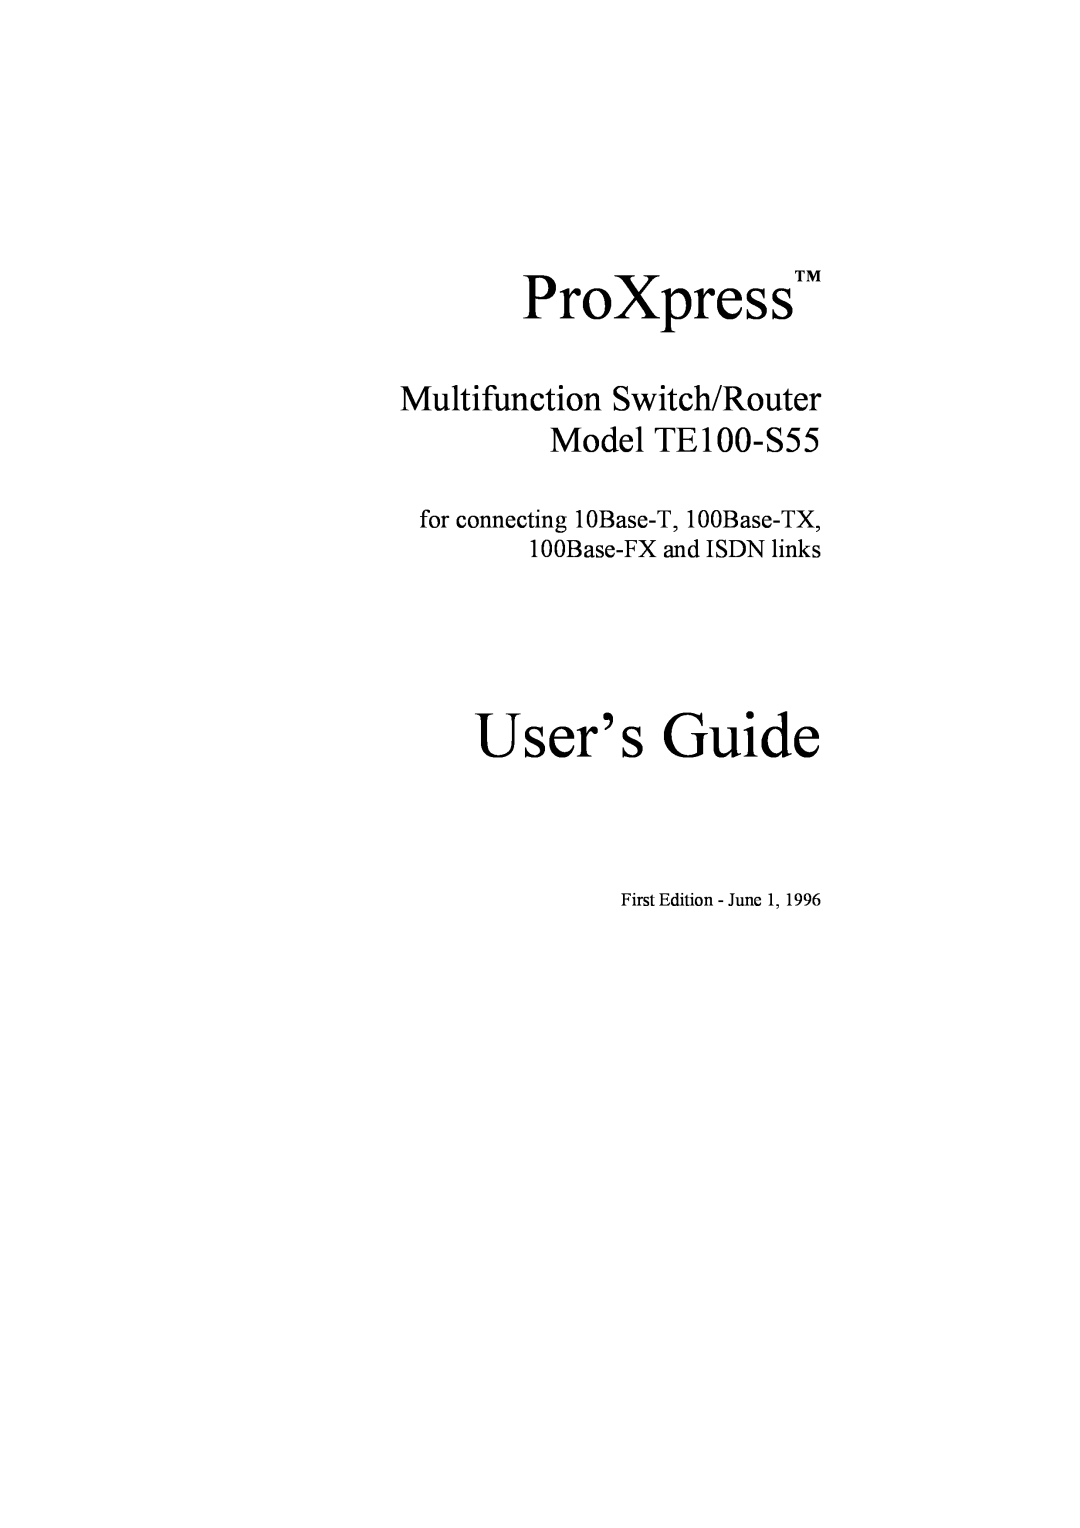 Cables to Go manual ProXpressTM, User’s Guide, Multifunction Switch/Router Model TE100-S55 